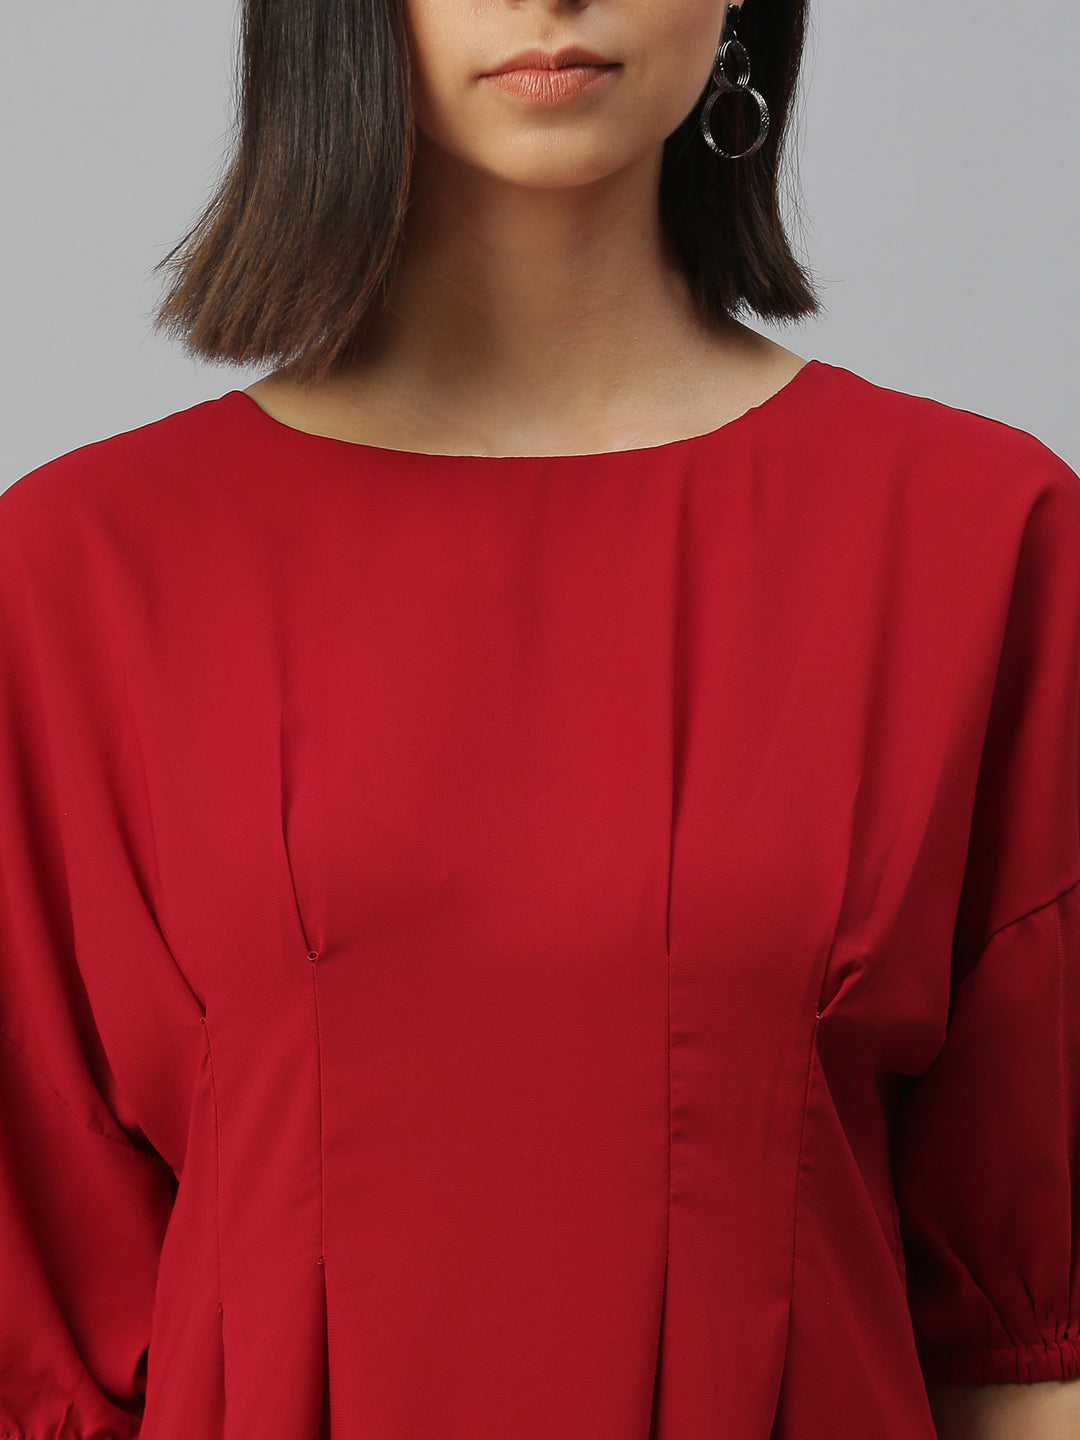 Women Solid A-Line Red Dress